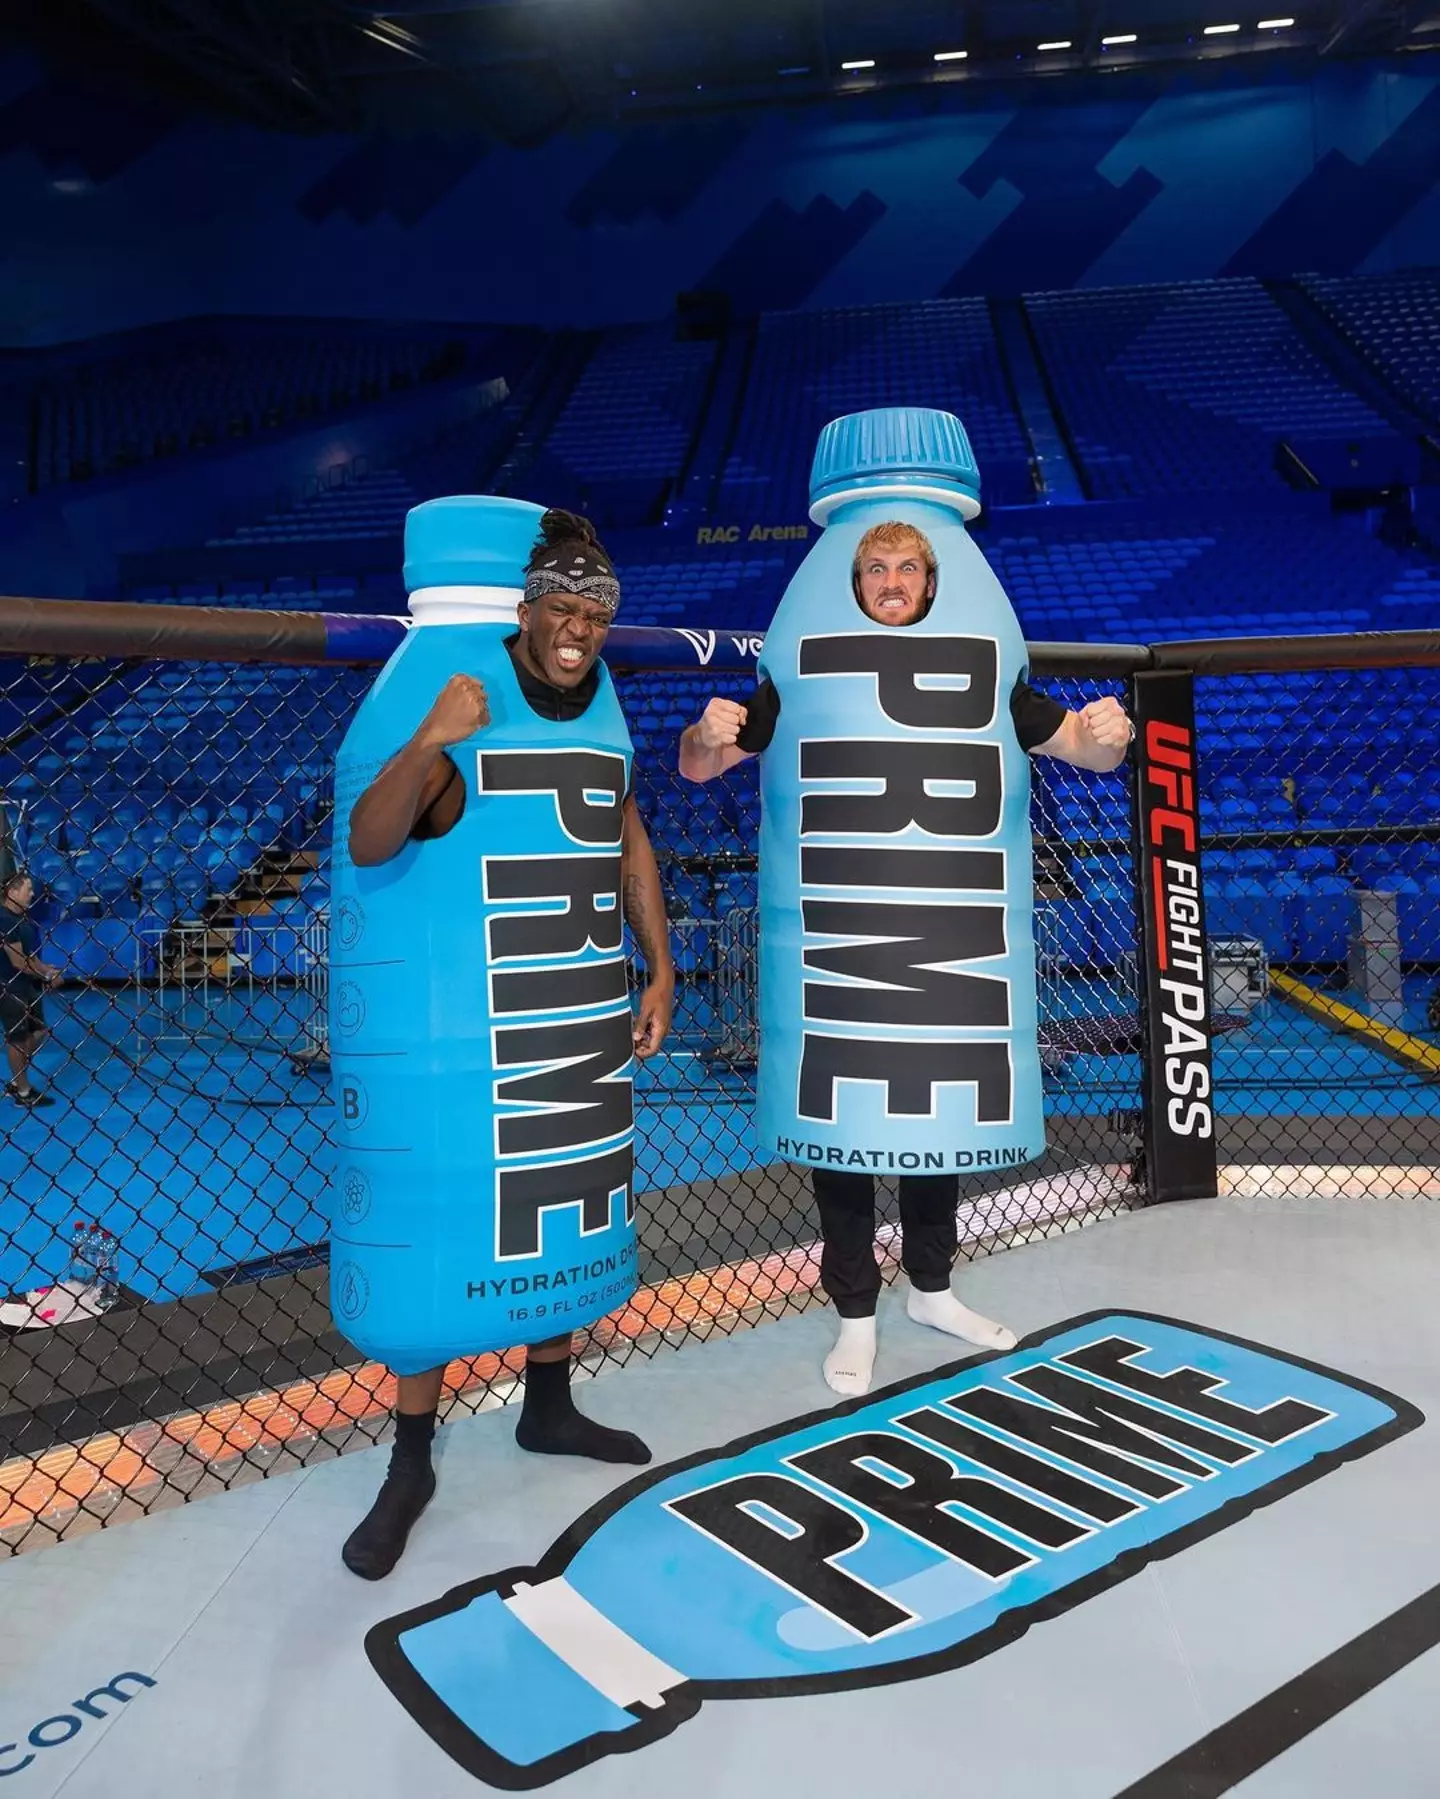 Prime Hydration was recently named the global sports drink of the UFC.